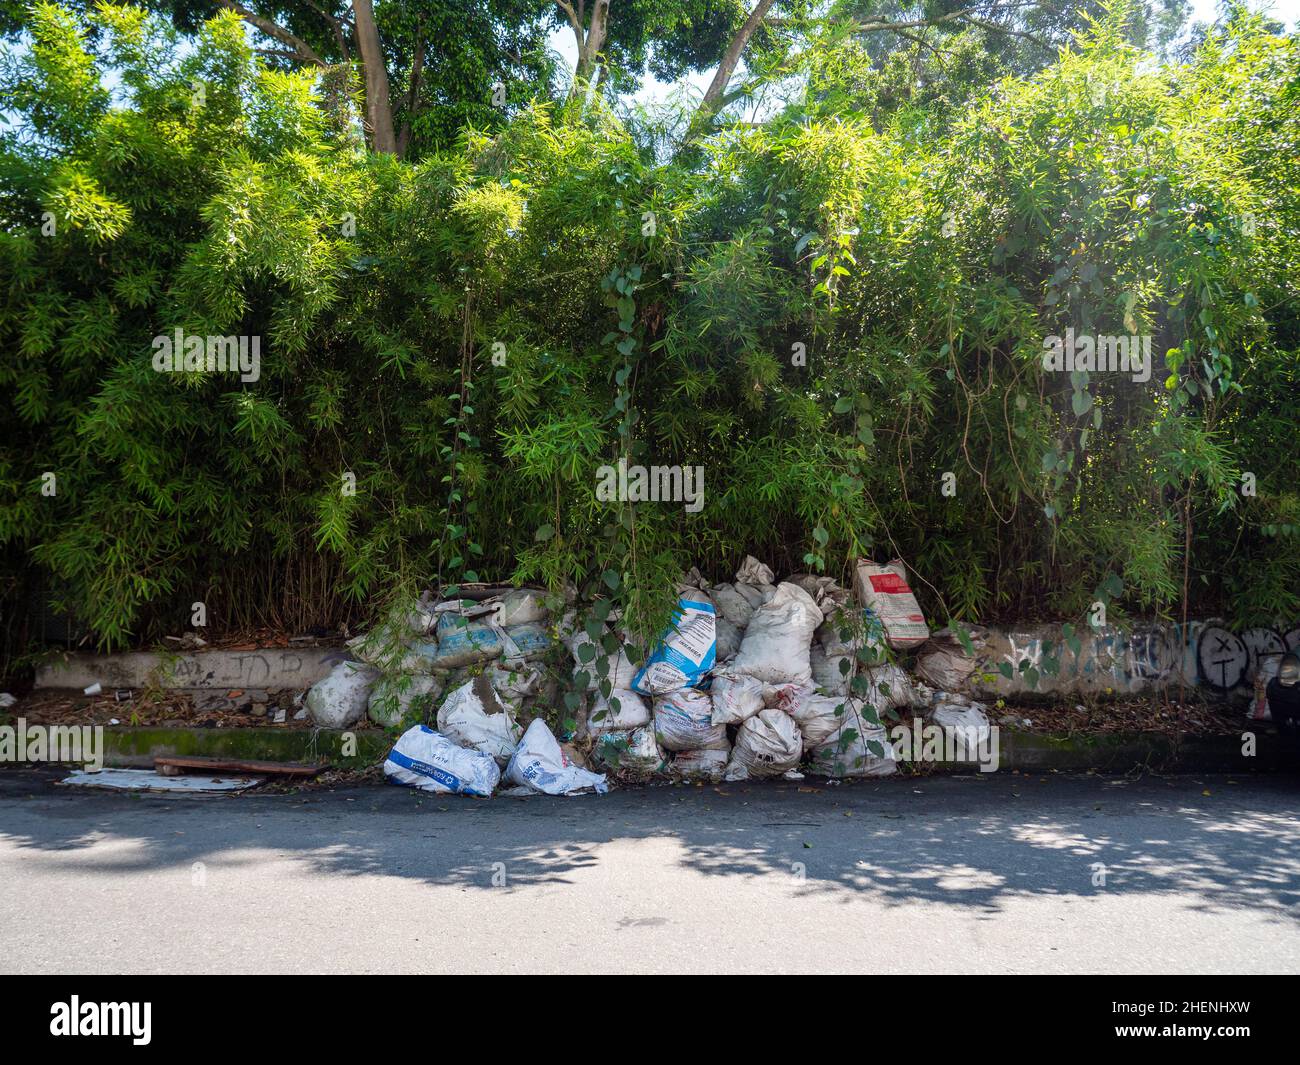 Medellin, Antioquia, Colombia - November 27 2021: Garbage Bags Accumulated on the Street Corner to be Picked up by the Collection Truck Stock Photo